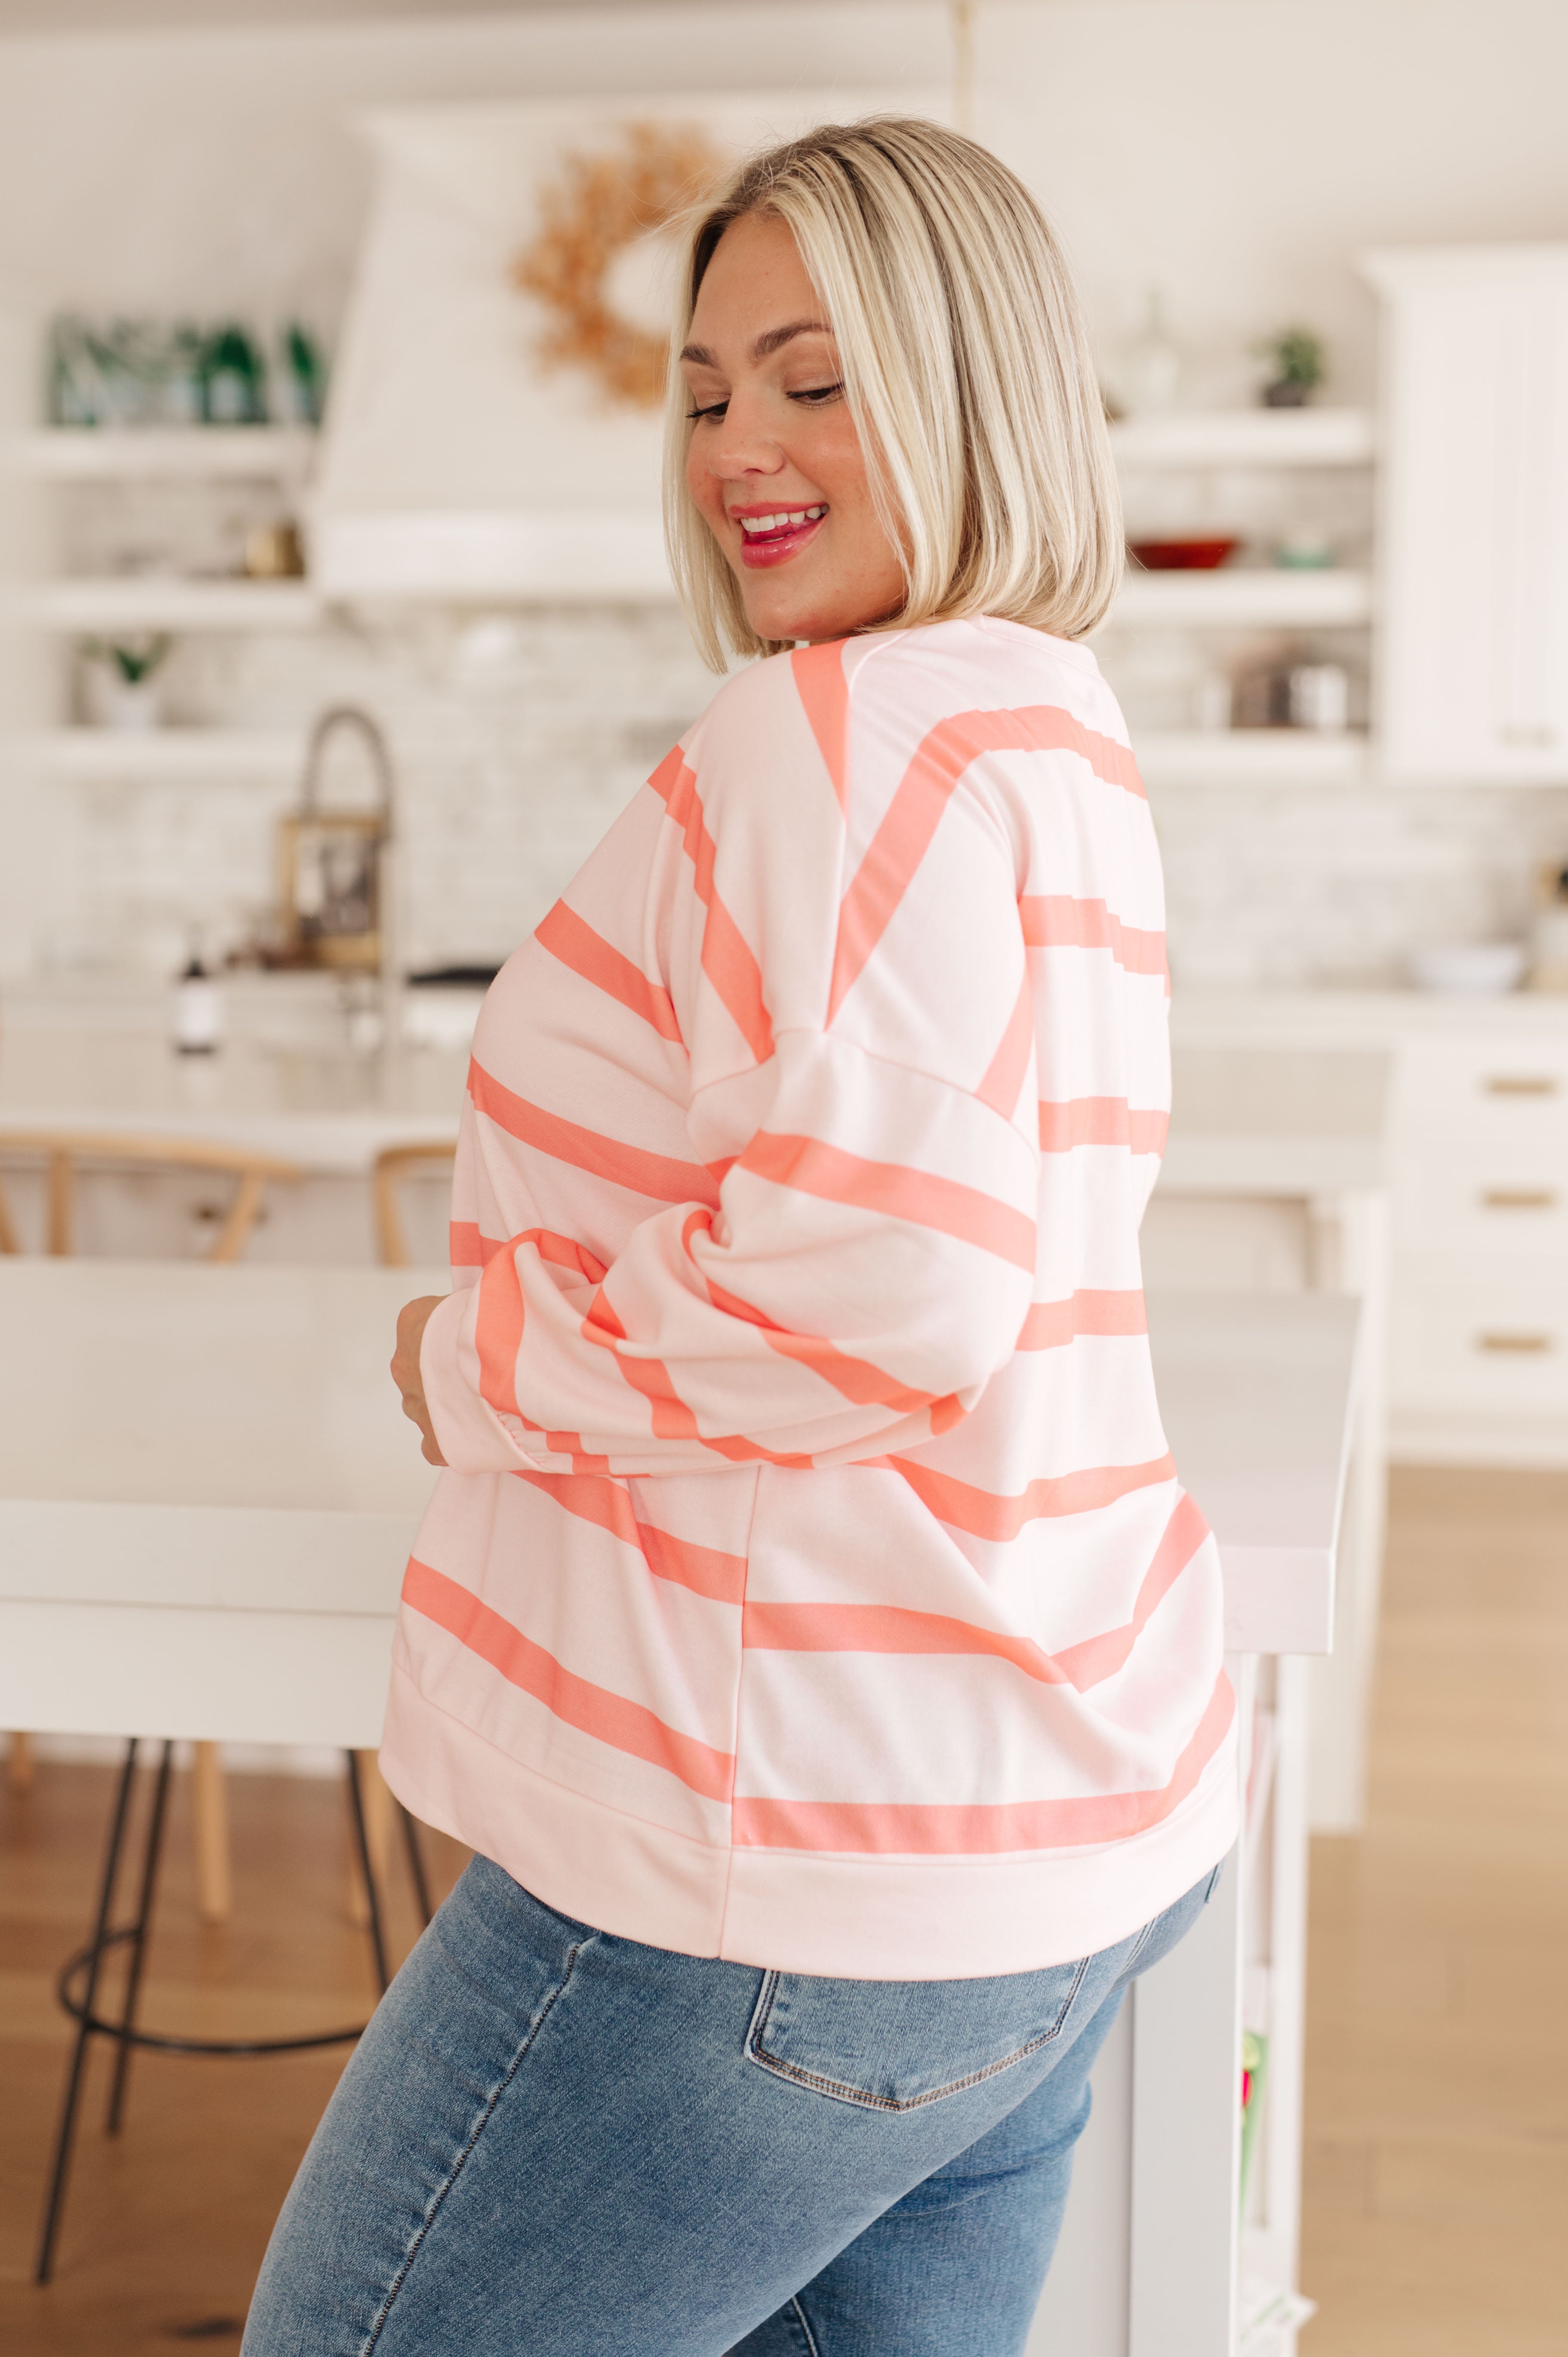 Here for the Stripes Long Sleeve Top - Lola Cerina Boutique